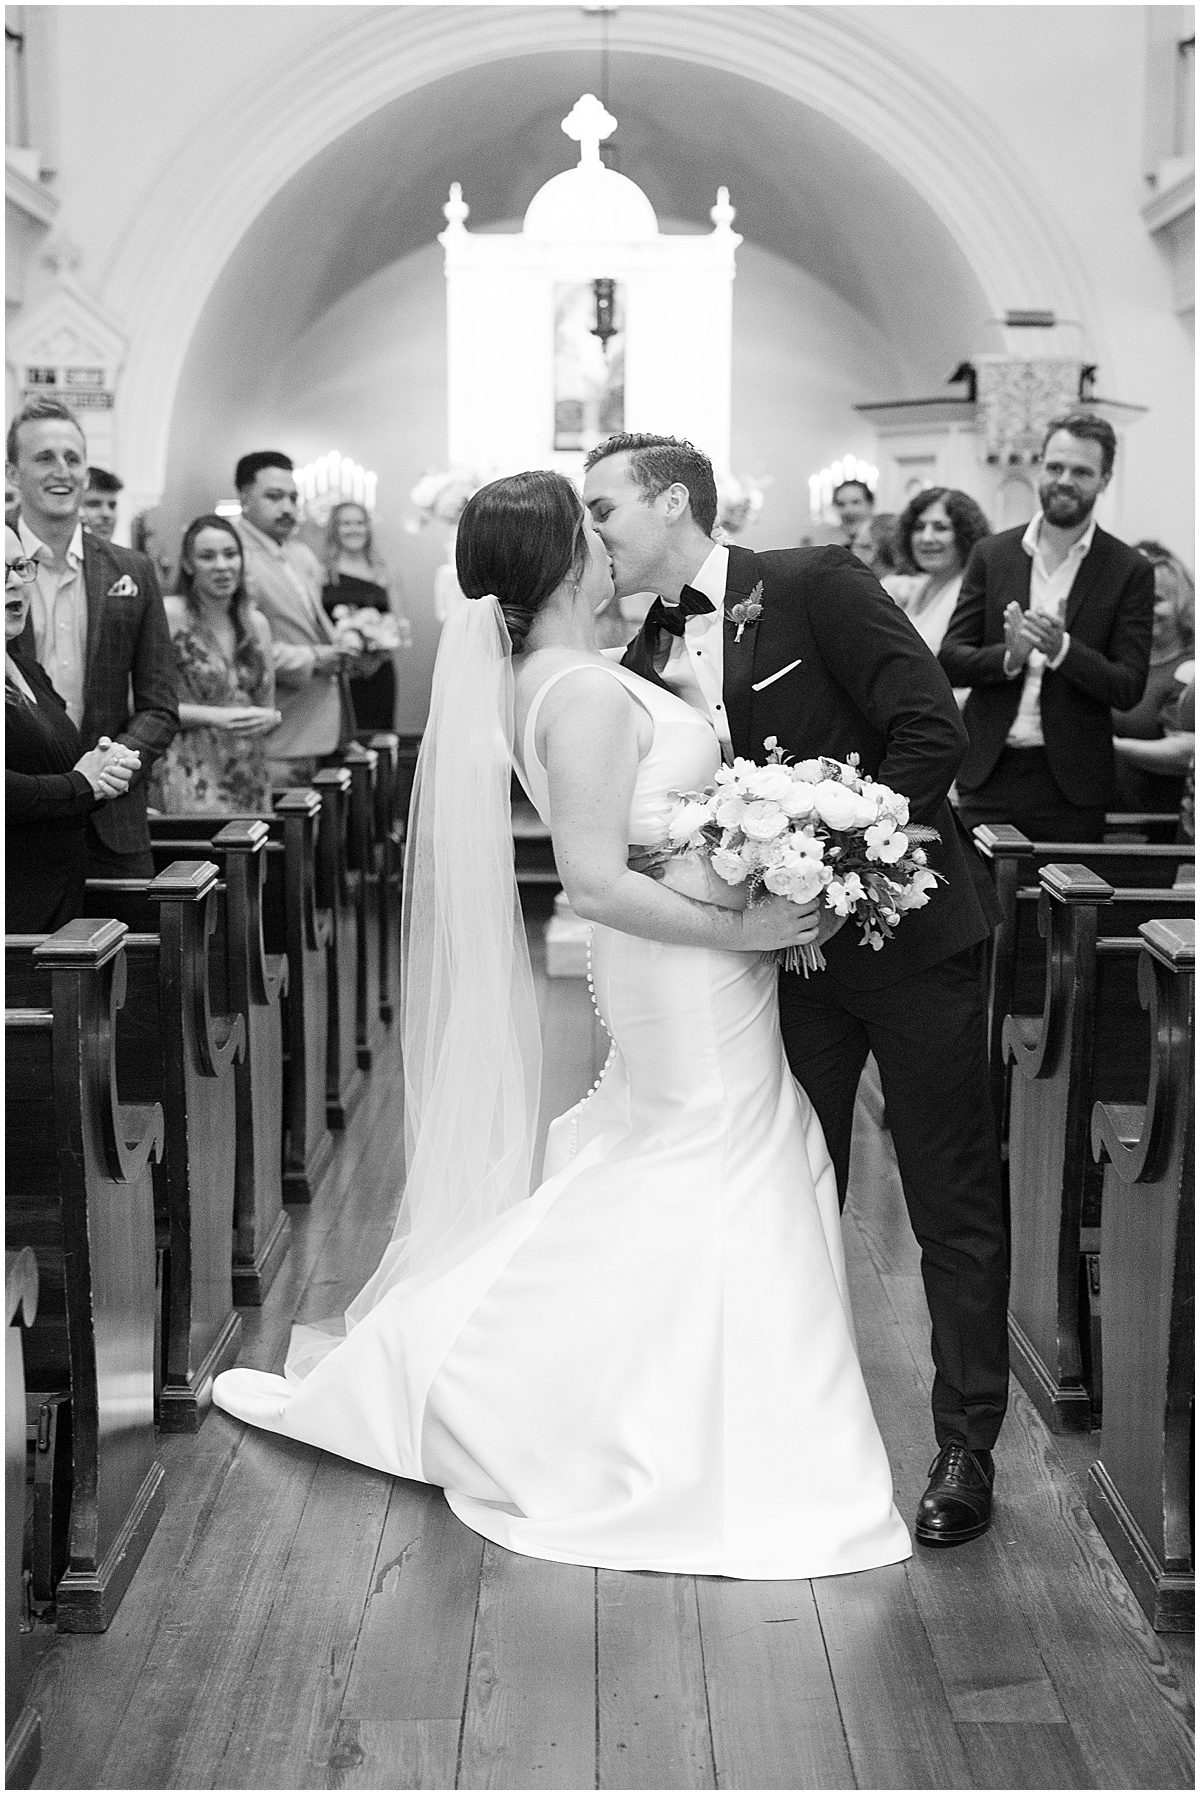 Black and White of Bride and Groom Kissing During Ceremony Recessional Photo